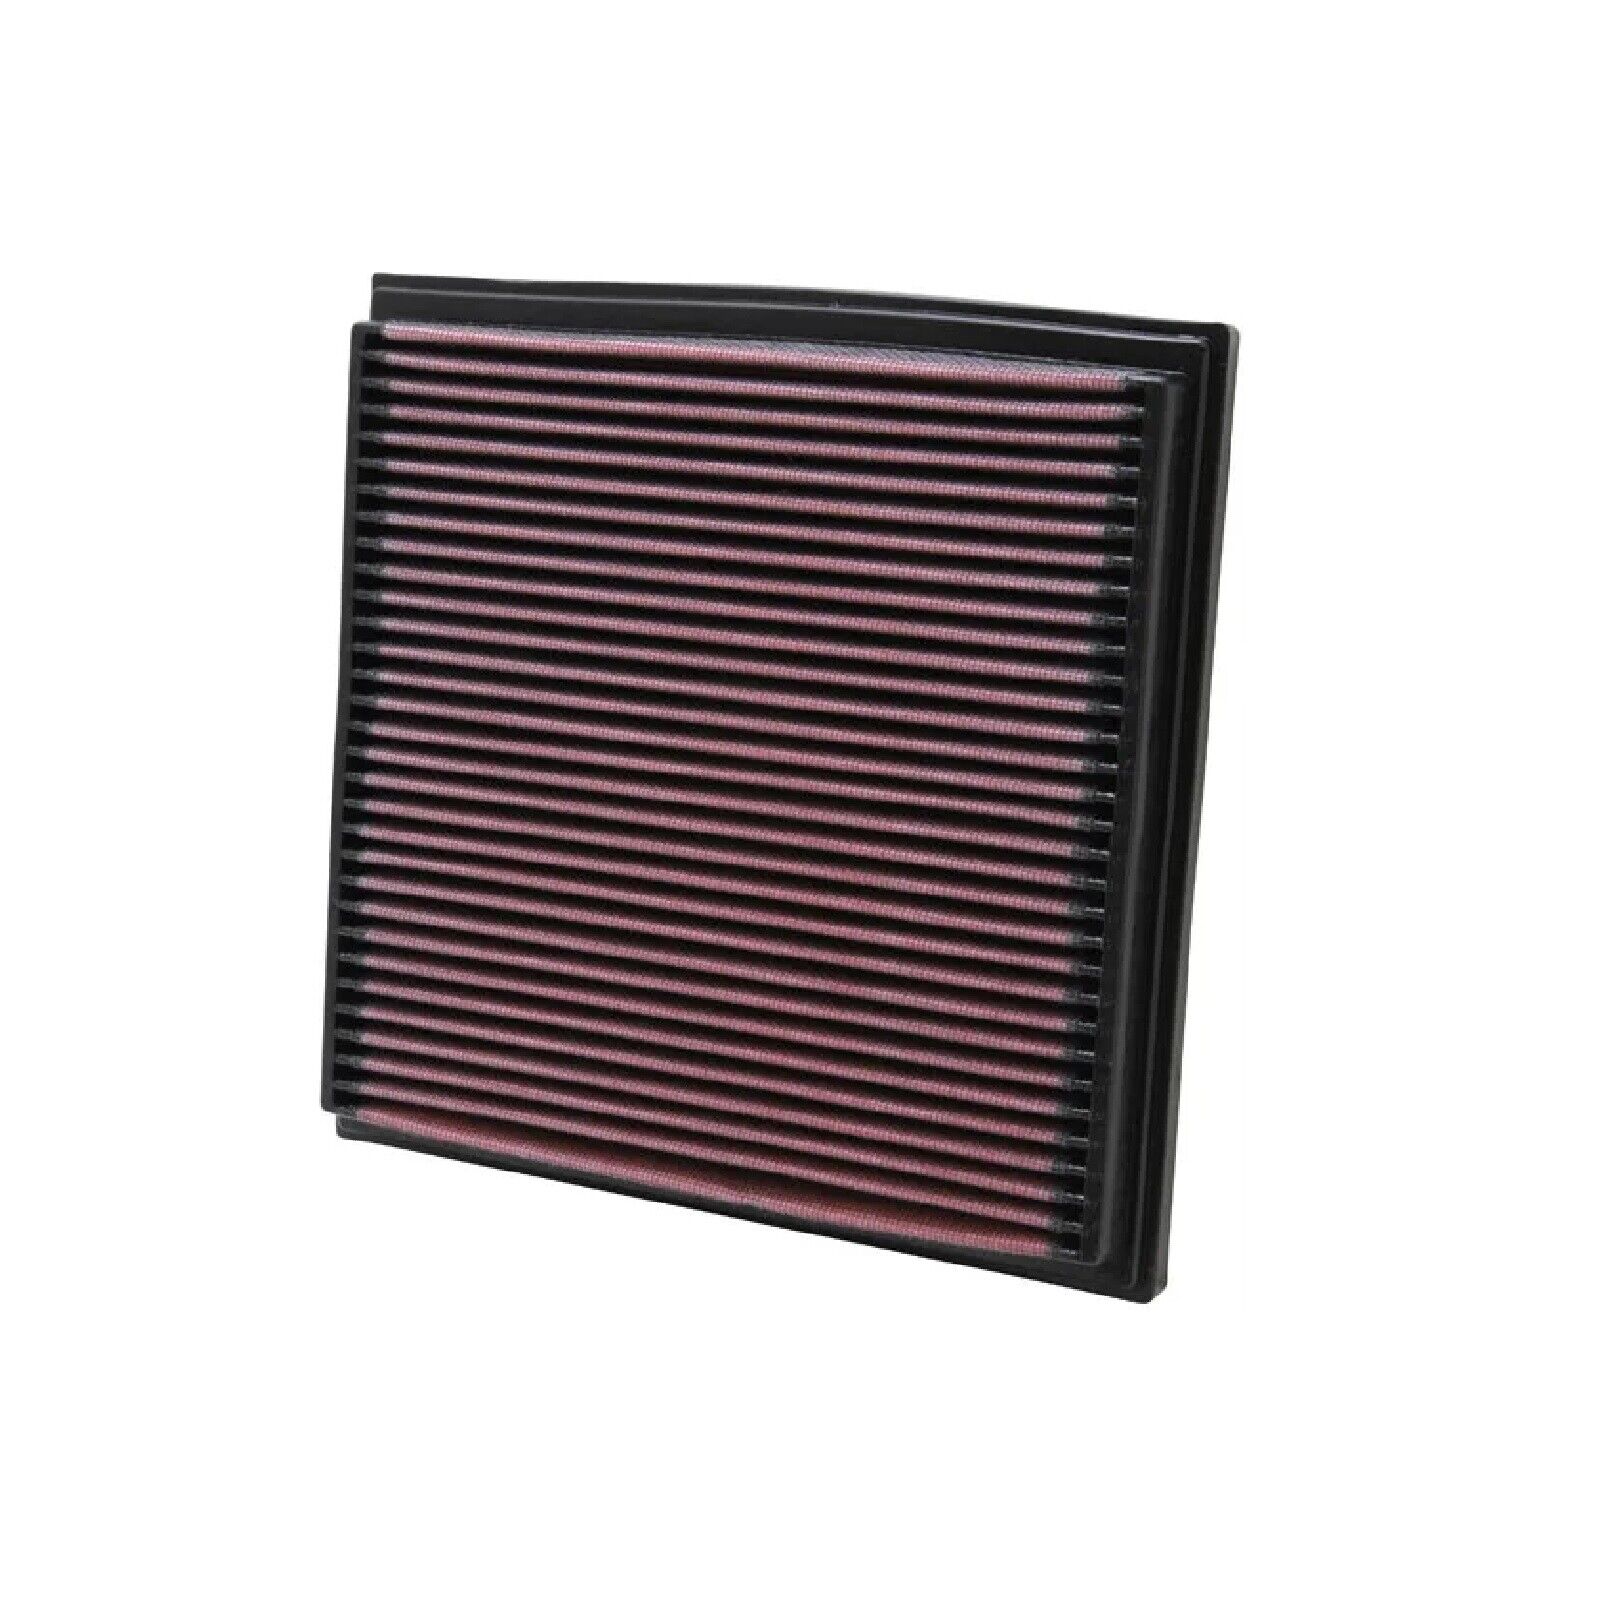 K&N 33-2733 Reusable Cotton Air Filter for BMW 316i/318i/318iS/318ti/318iC/Z3